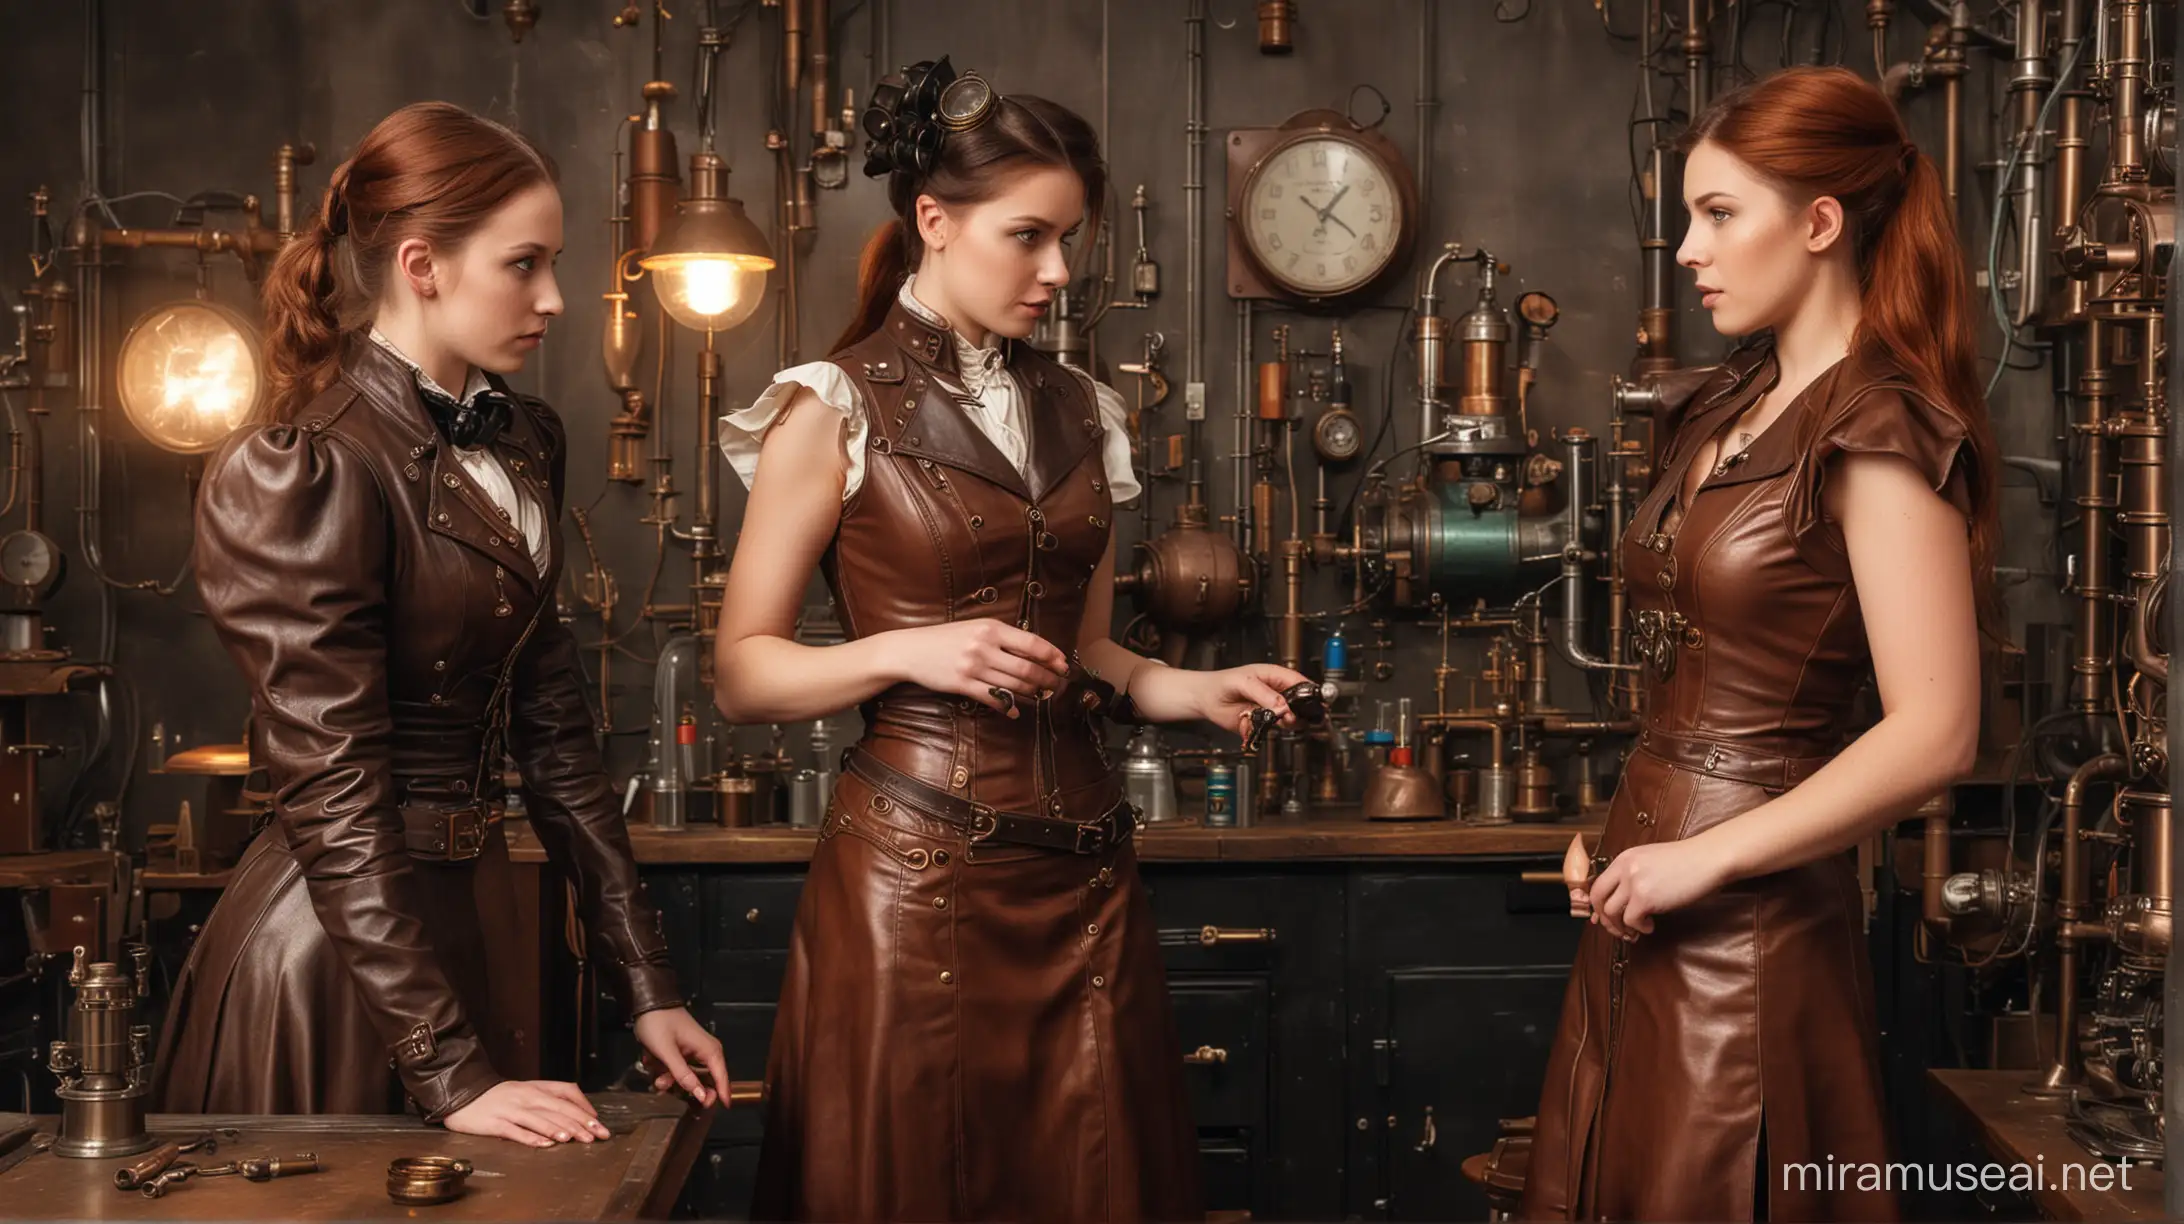 a young scientist presents his time machine to some ladies in steampunk leather dresses in his laboratory. copper, brass, some steam.